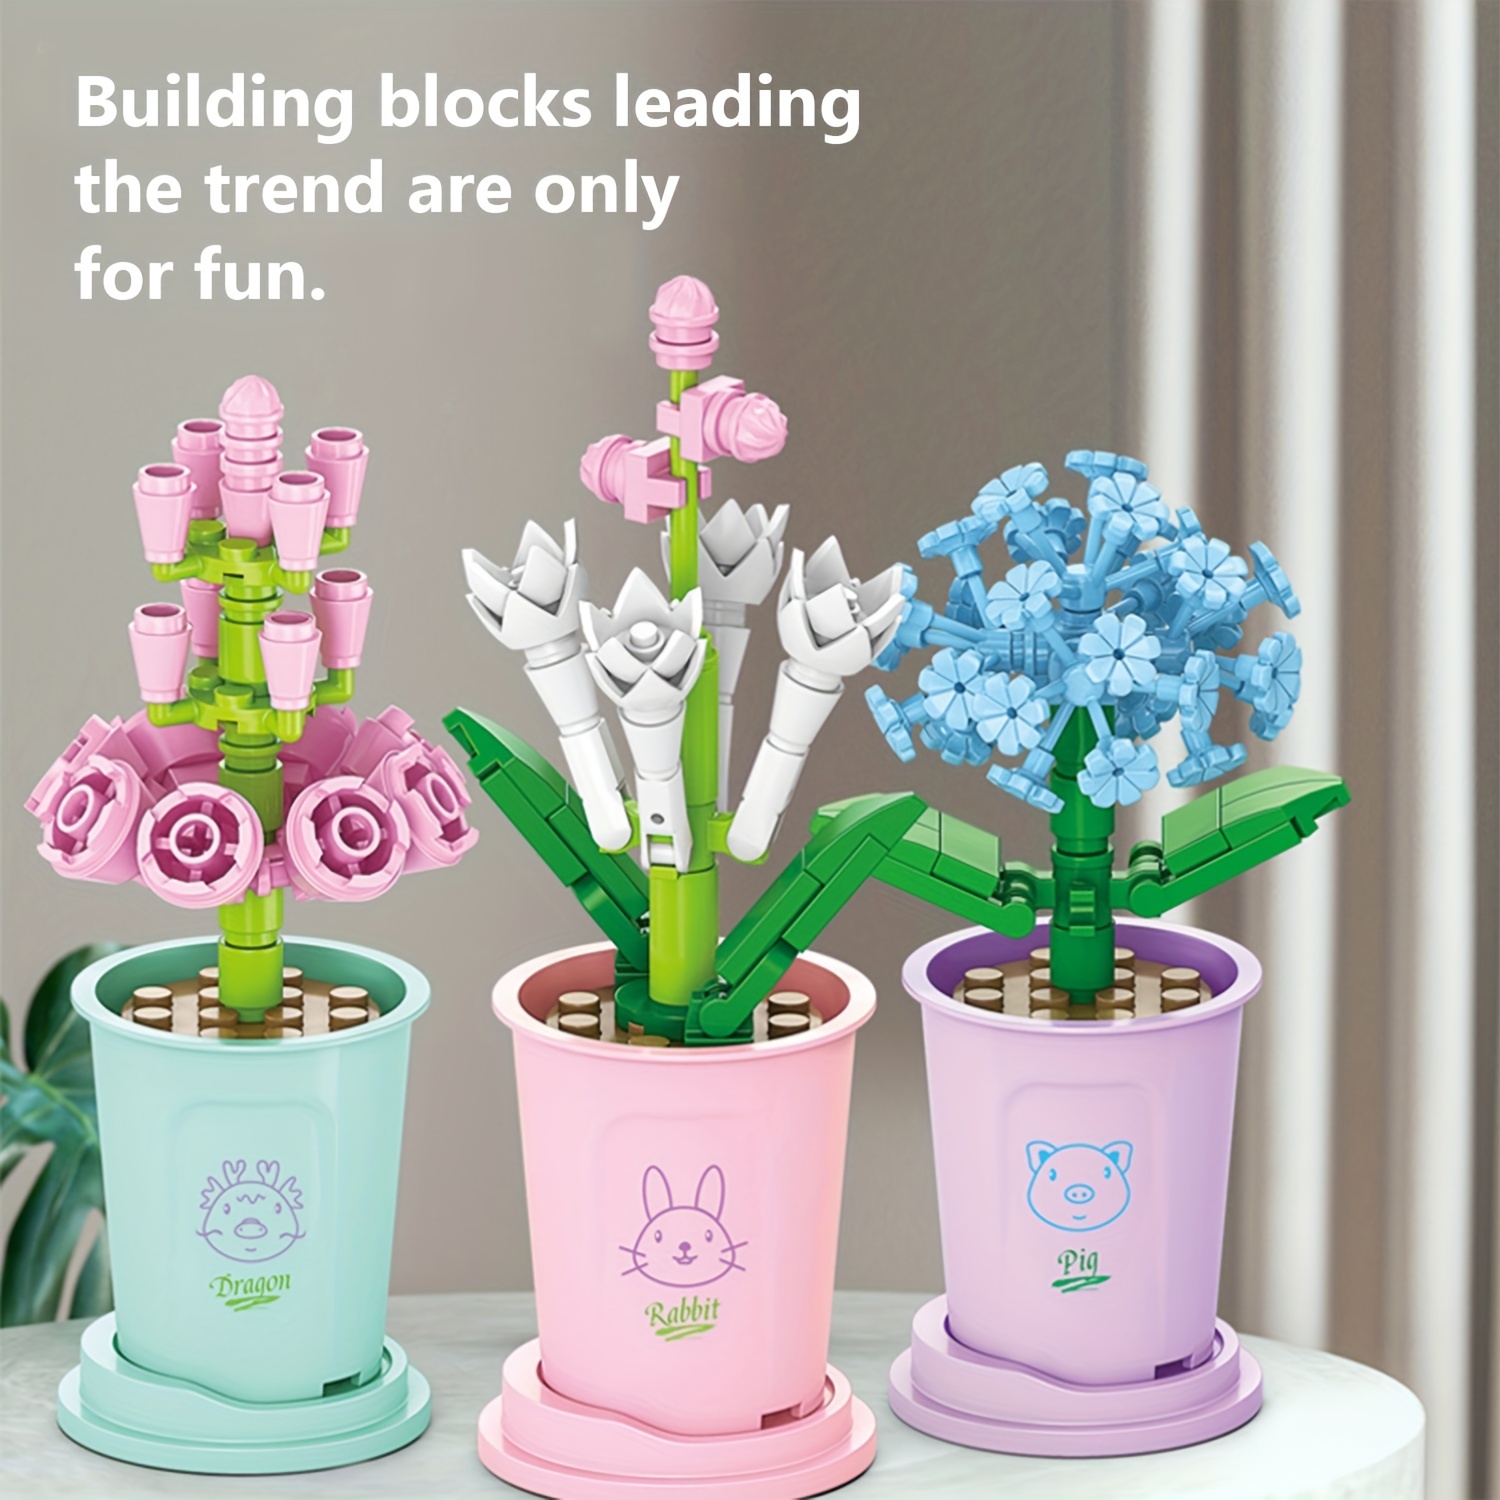 Mamaboo KIds Play Flower Blocks - KIds Play Flower Blocks . shop for  Mamaboo products in India.